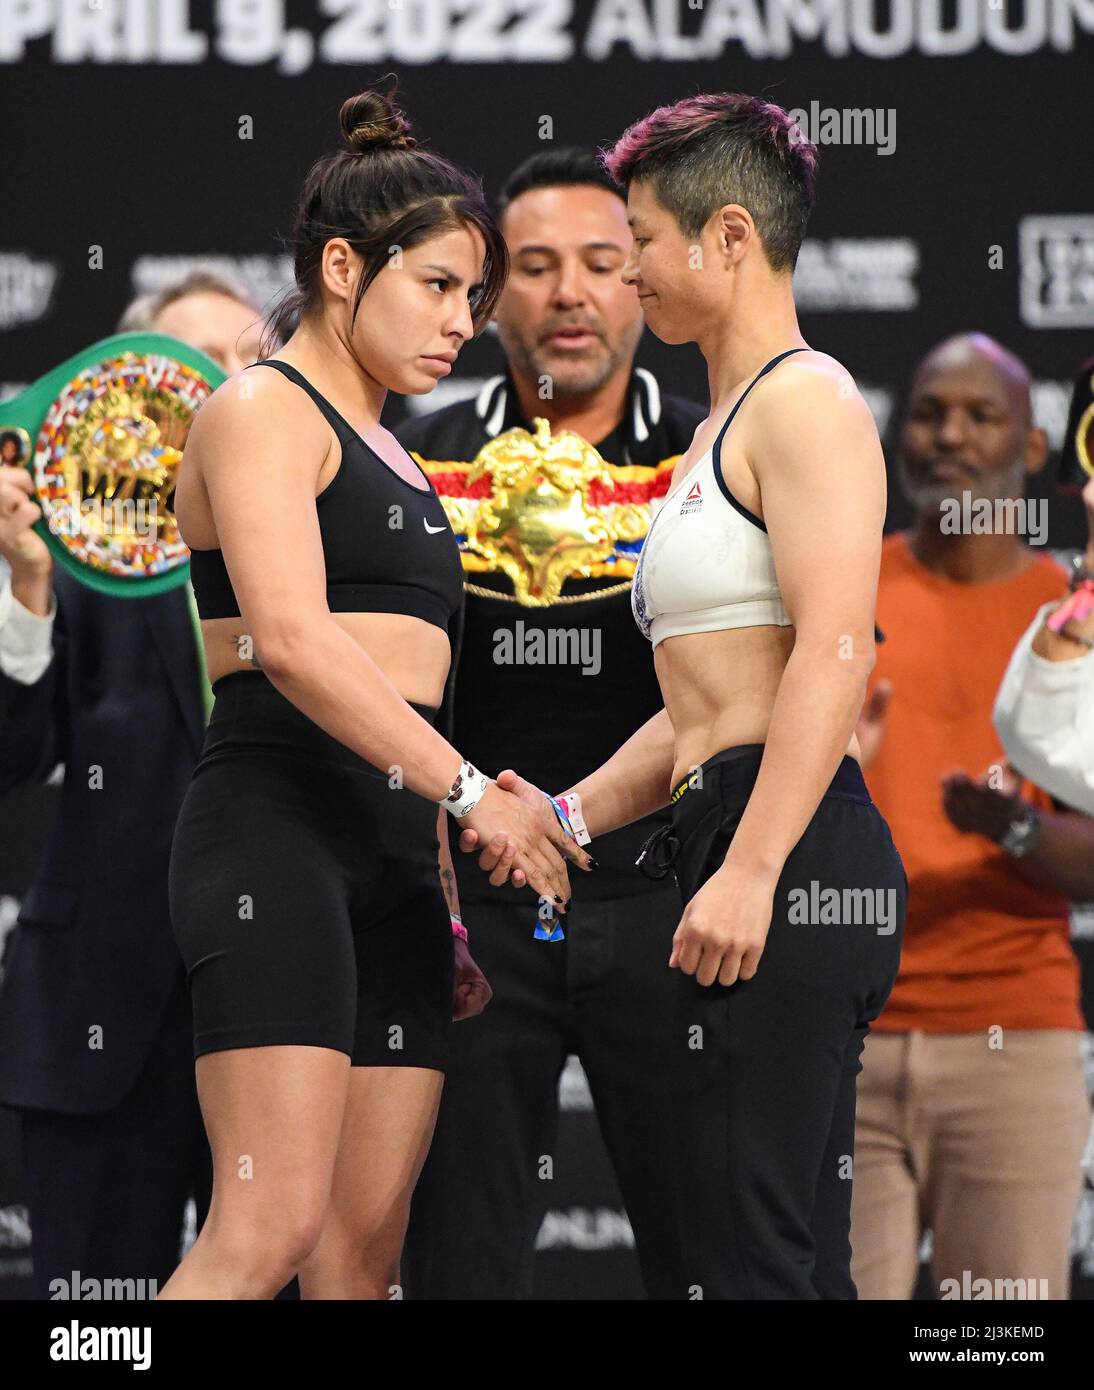 Texas, USA. 08th Apr, 2022. SAN ANTONIO, TX - APRIL 8: (L-R) Marlen Esparza (111.4lbs) and Naoka Fujioka (111.6) face-off for the WBA, WBC, & Vacant Ring Magazine Flyweight title at the Alamodome Stadium, on April 8, 2022, in San Antonio, Texas, USA (Photo by Mikael Ona/PxImages) Credit: Px Images/Alamy Live News Stock Photo